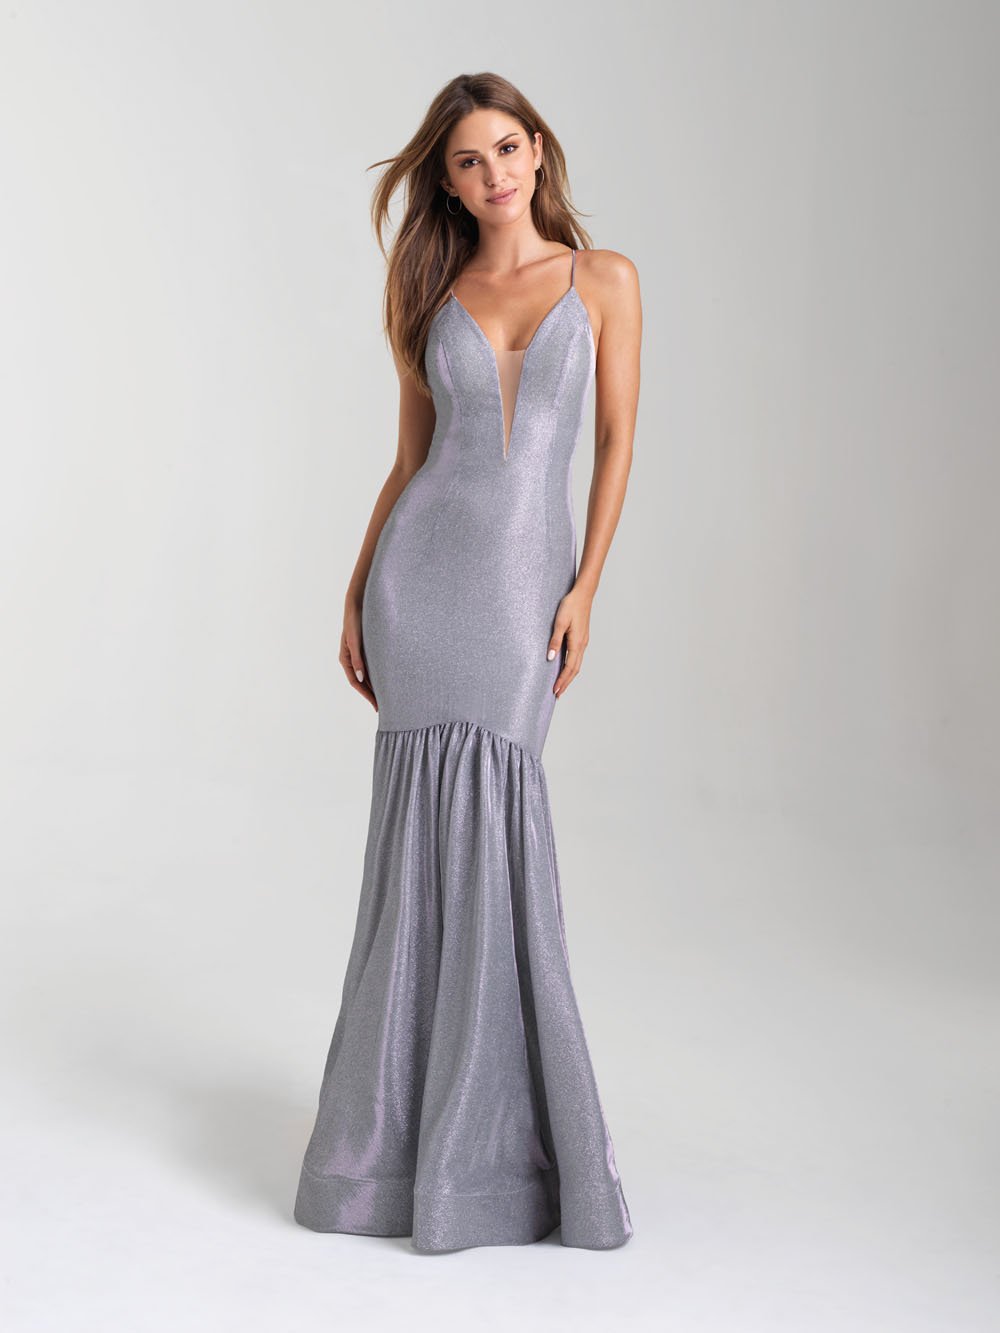 Madison James 20-355 dress images in these colors: Gold, Silver, Red.